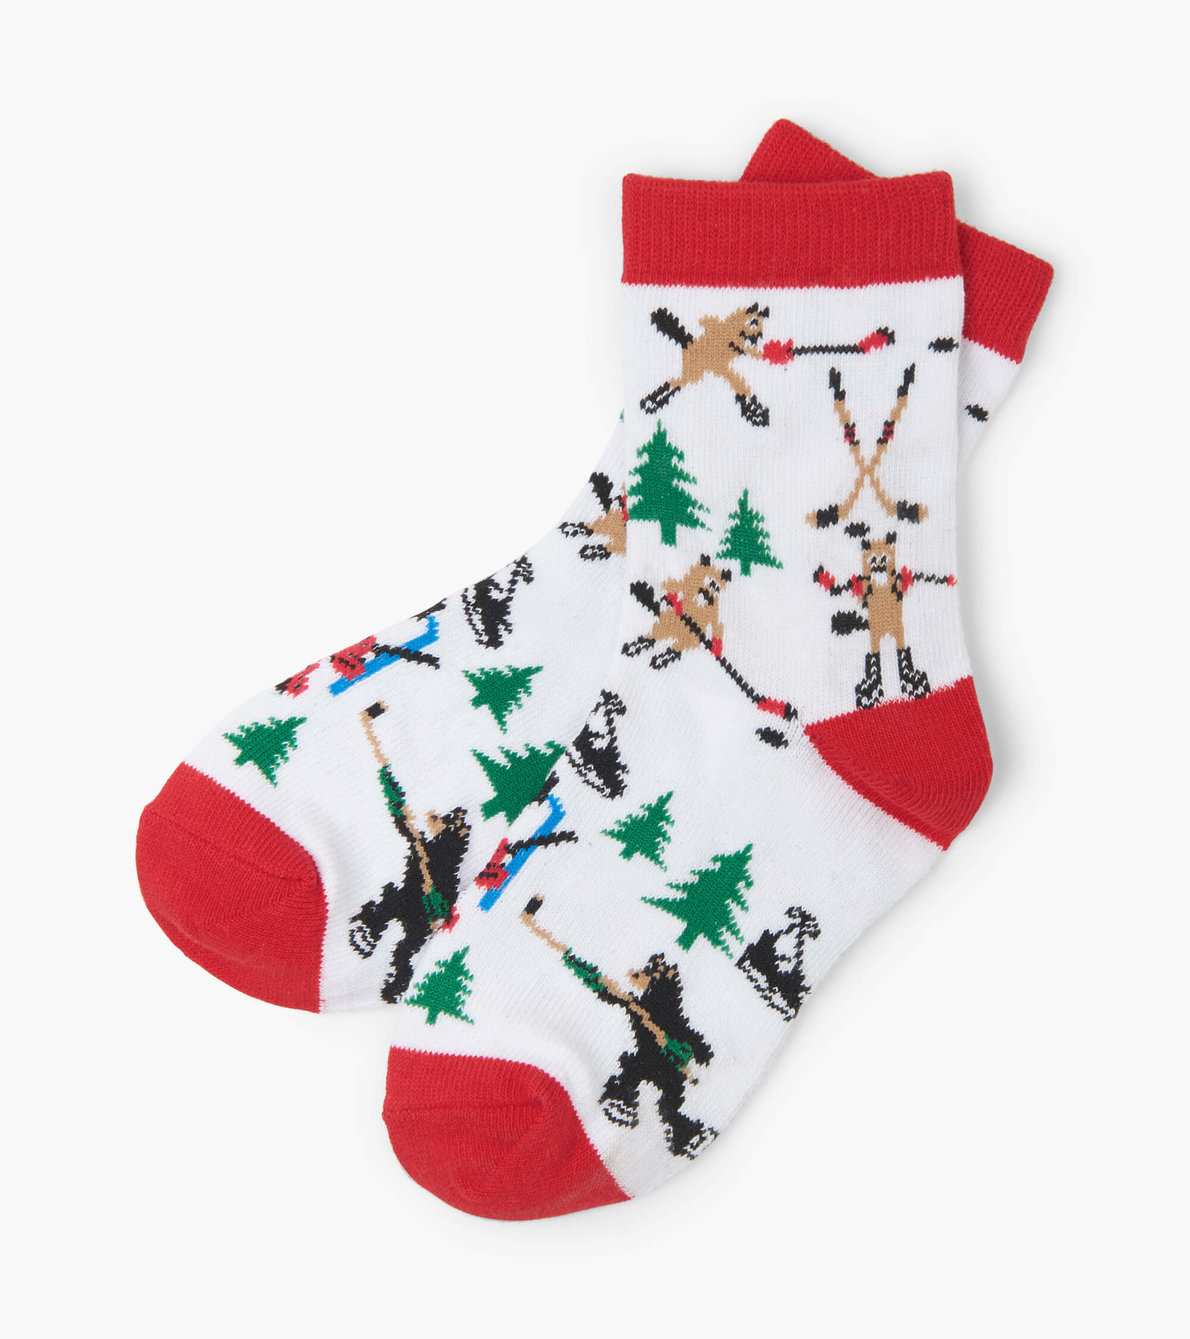 View larger image of Wild about Hockey Kids Crew Socks